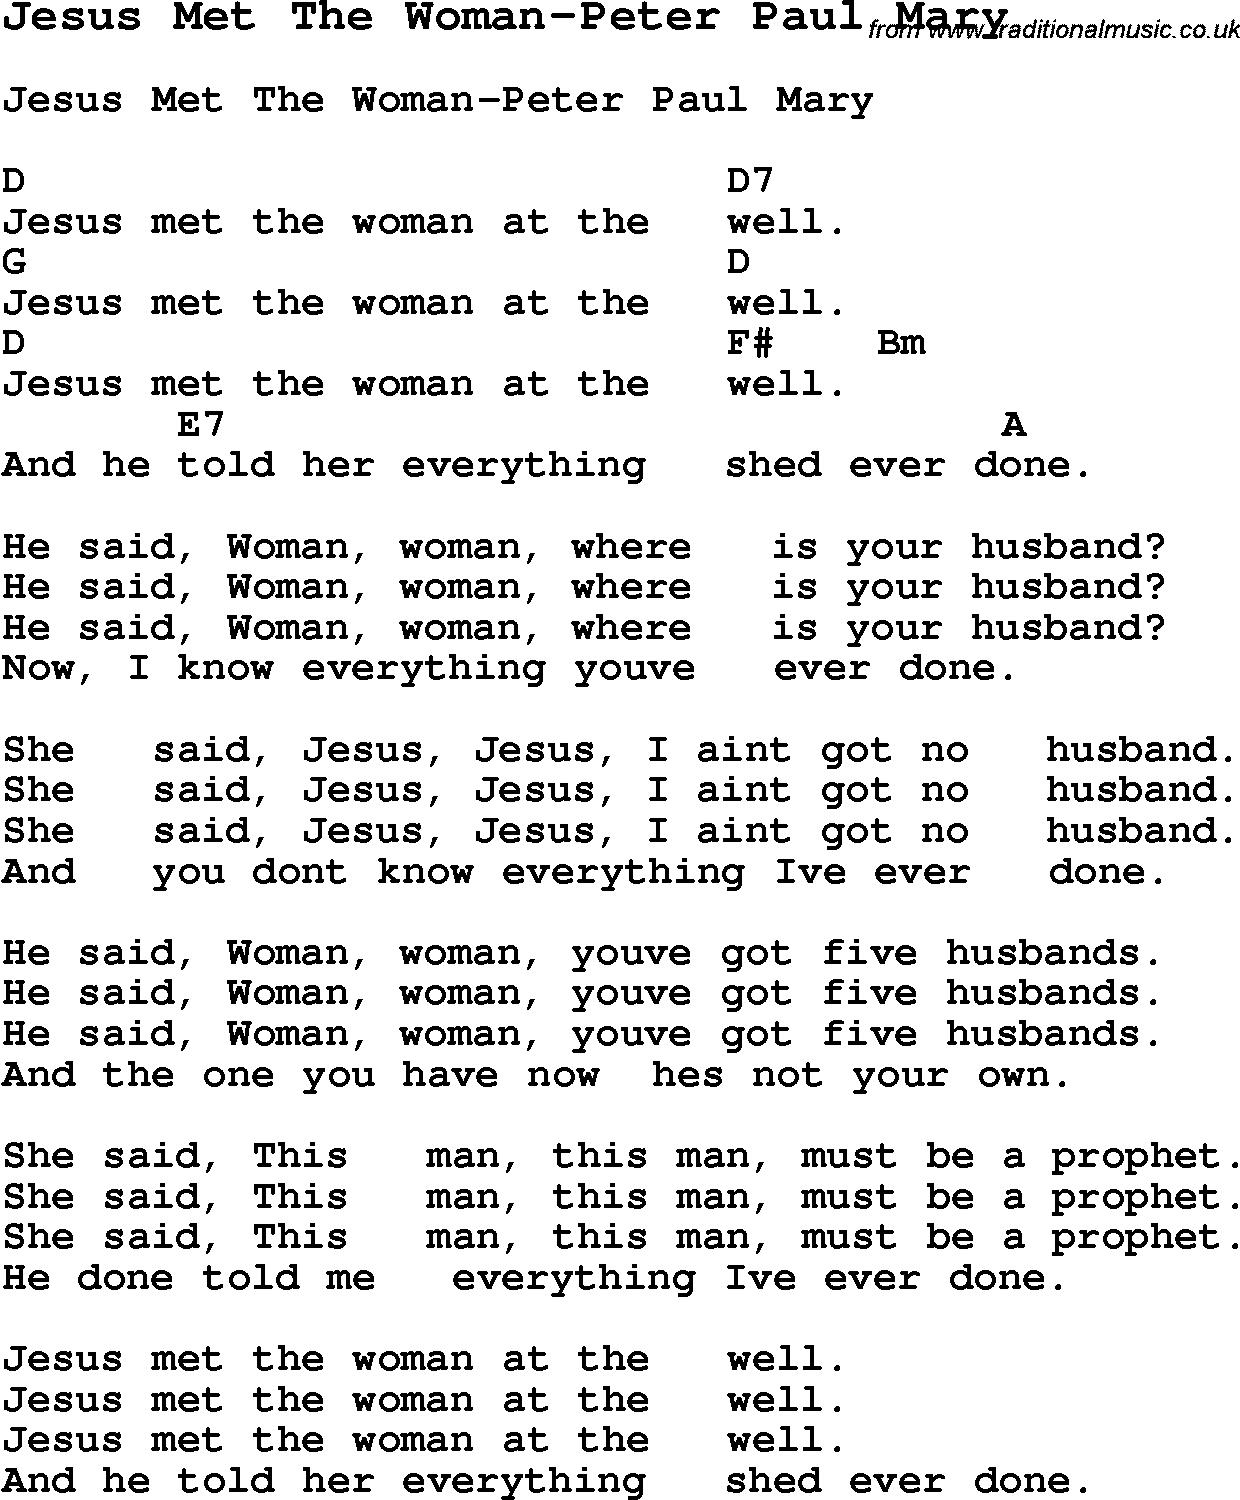 Summer-Camp Song, Jesus Met The Woman-Peter Paul Mary, with lyrics and chords for Ukulele, Guitar Banjo etc.